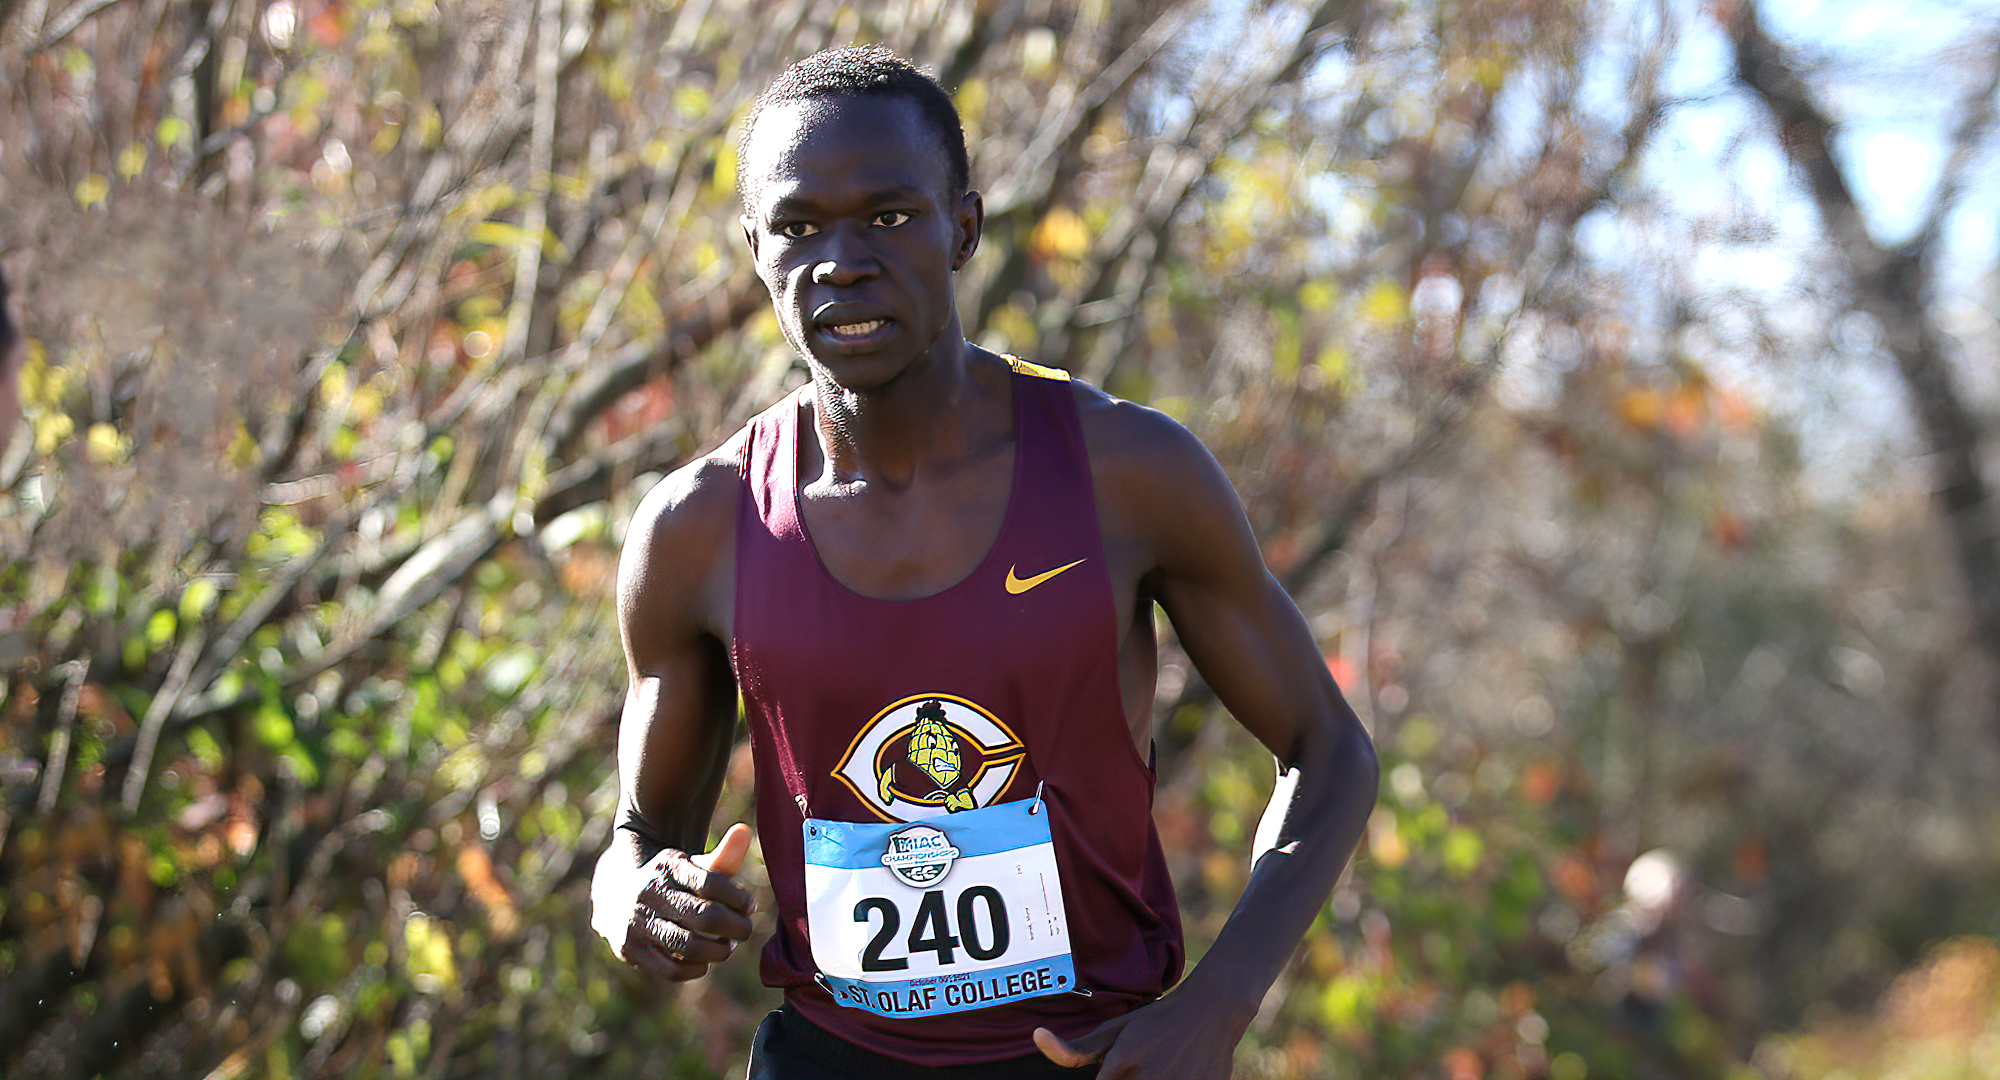 Munir Isahak became the first Cobber athlete to earn All-Region honors after he finished 14th at the NCAA North Region Meet. (Photo courtesy of Nathan Lodermeier)